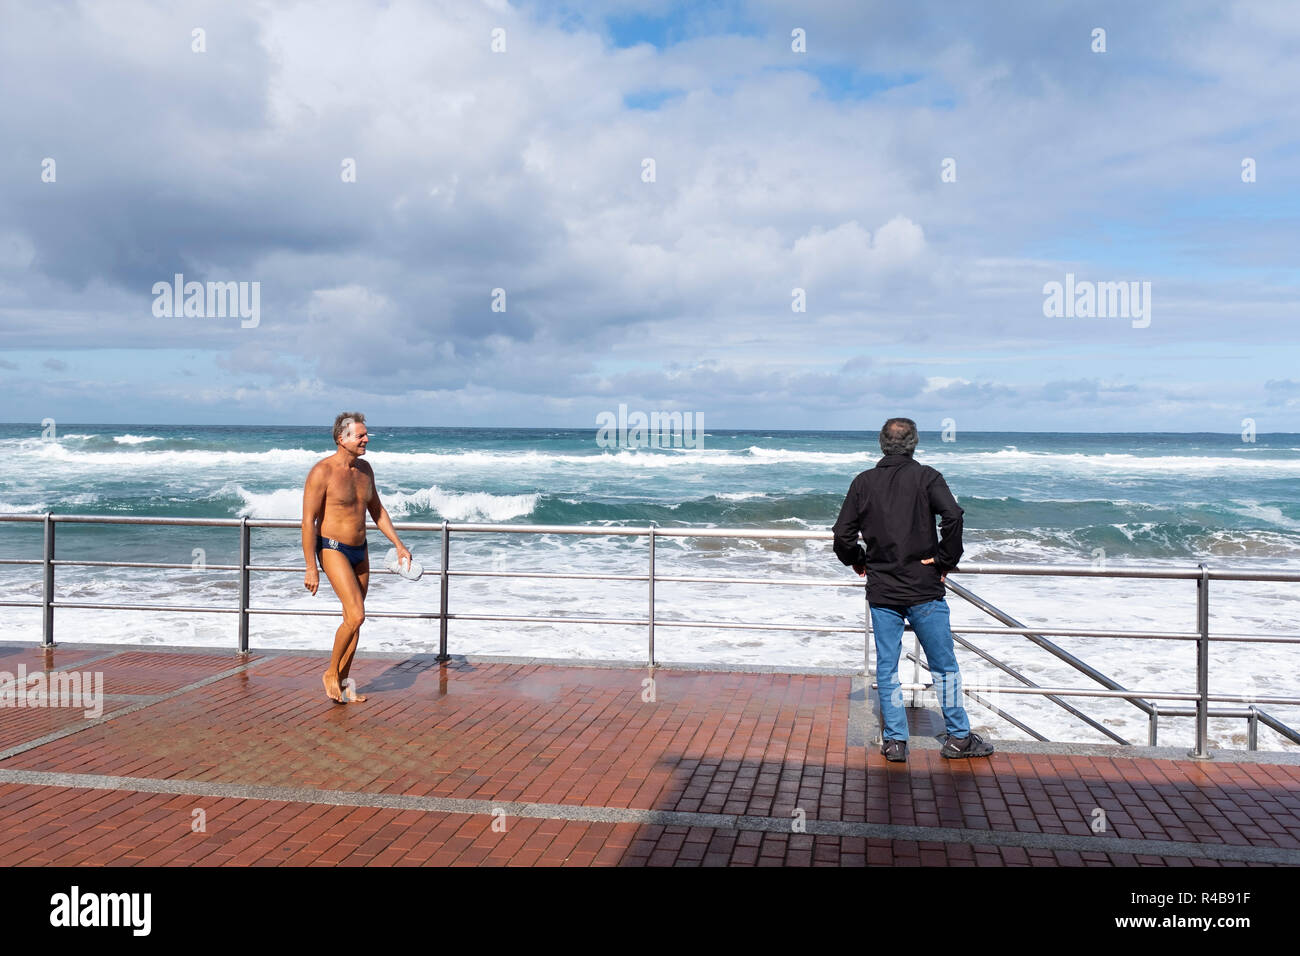 a dressed man and another in a swimsuit on the beach Stock Photo